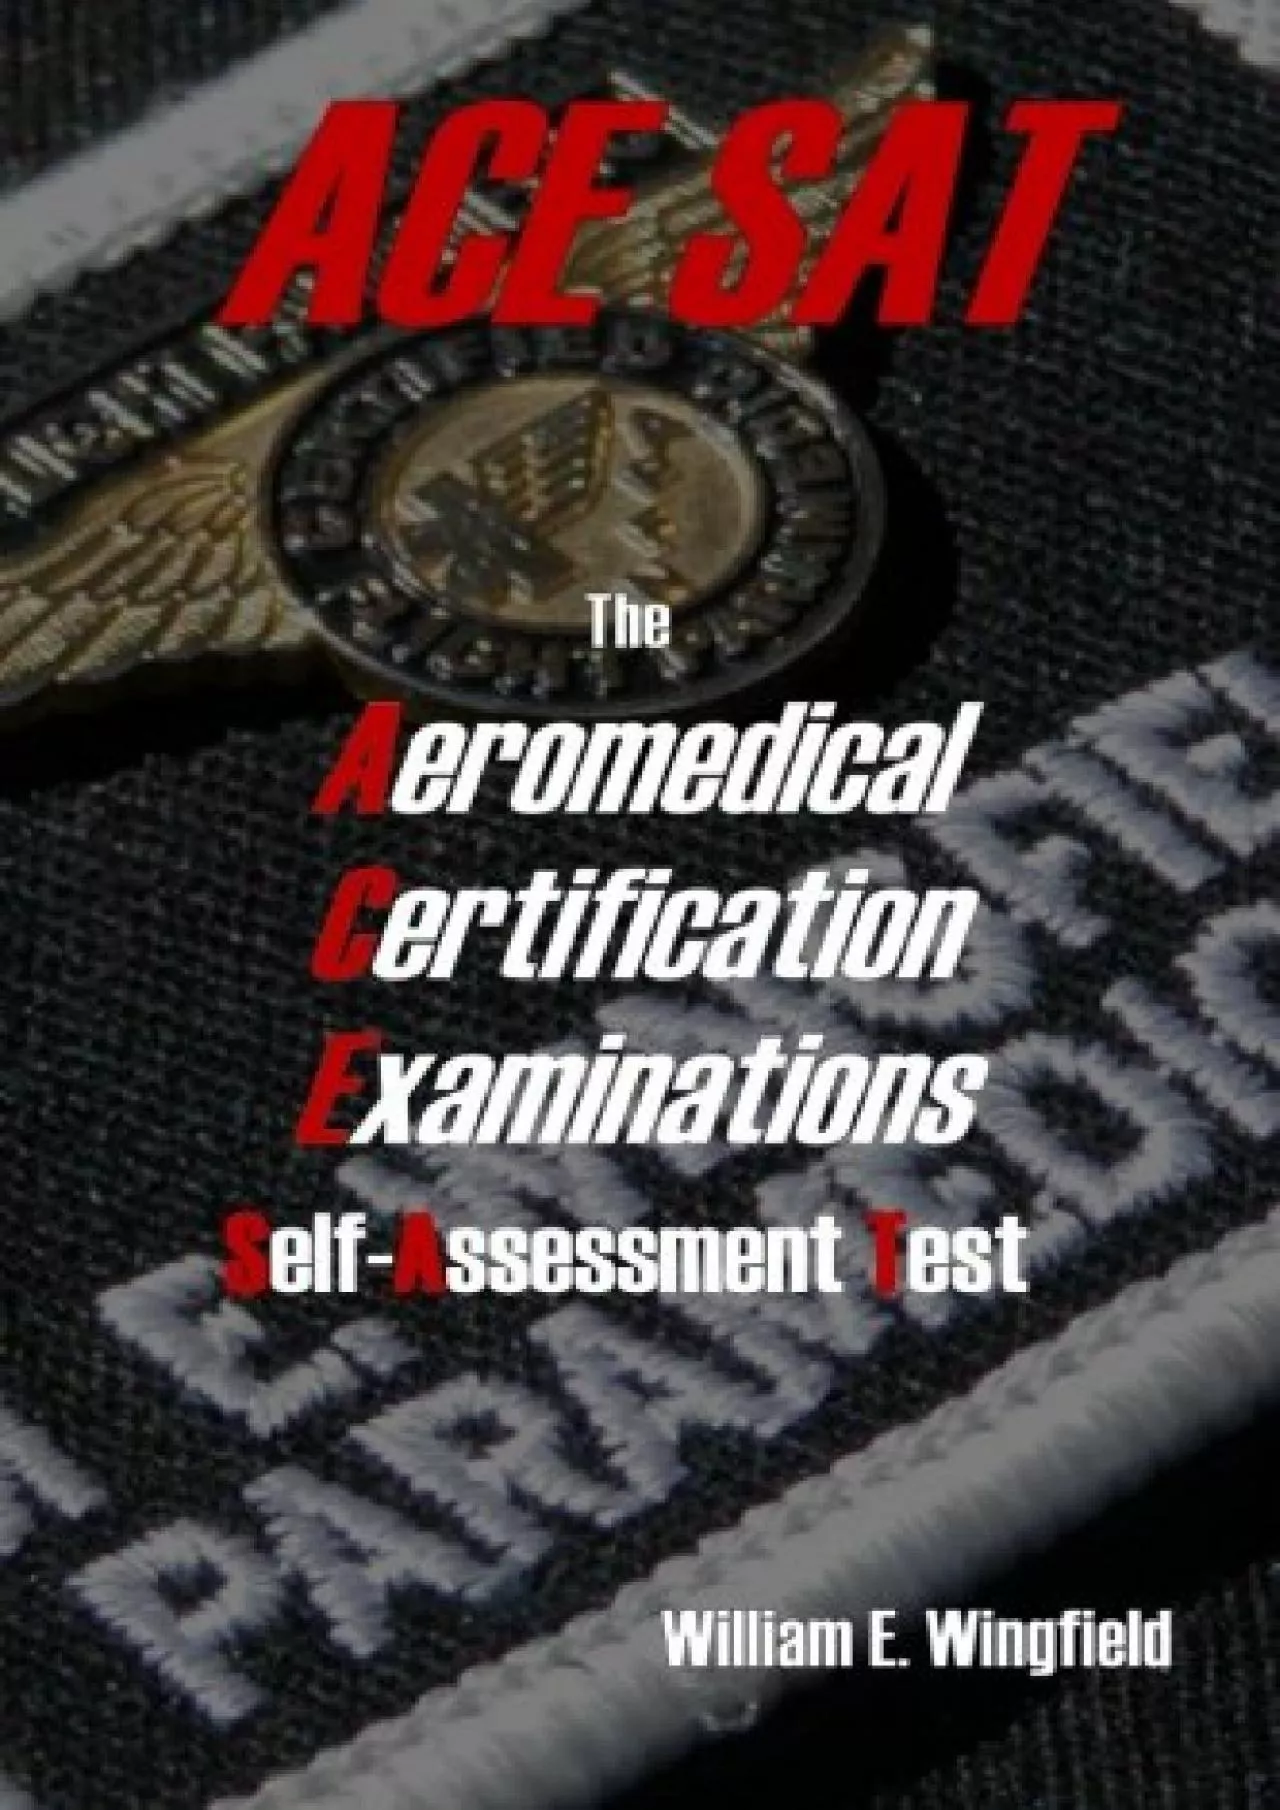 [READ] The Aeromedical Certification Examinations Self-Assessment Test